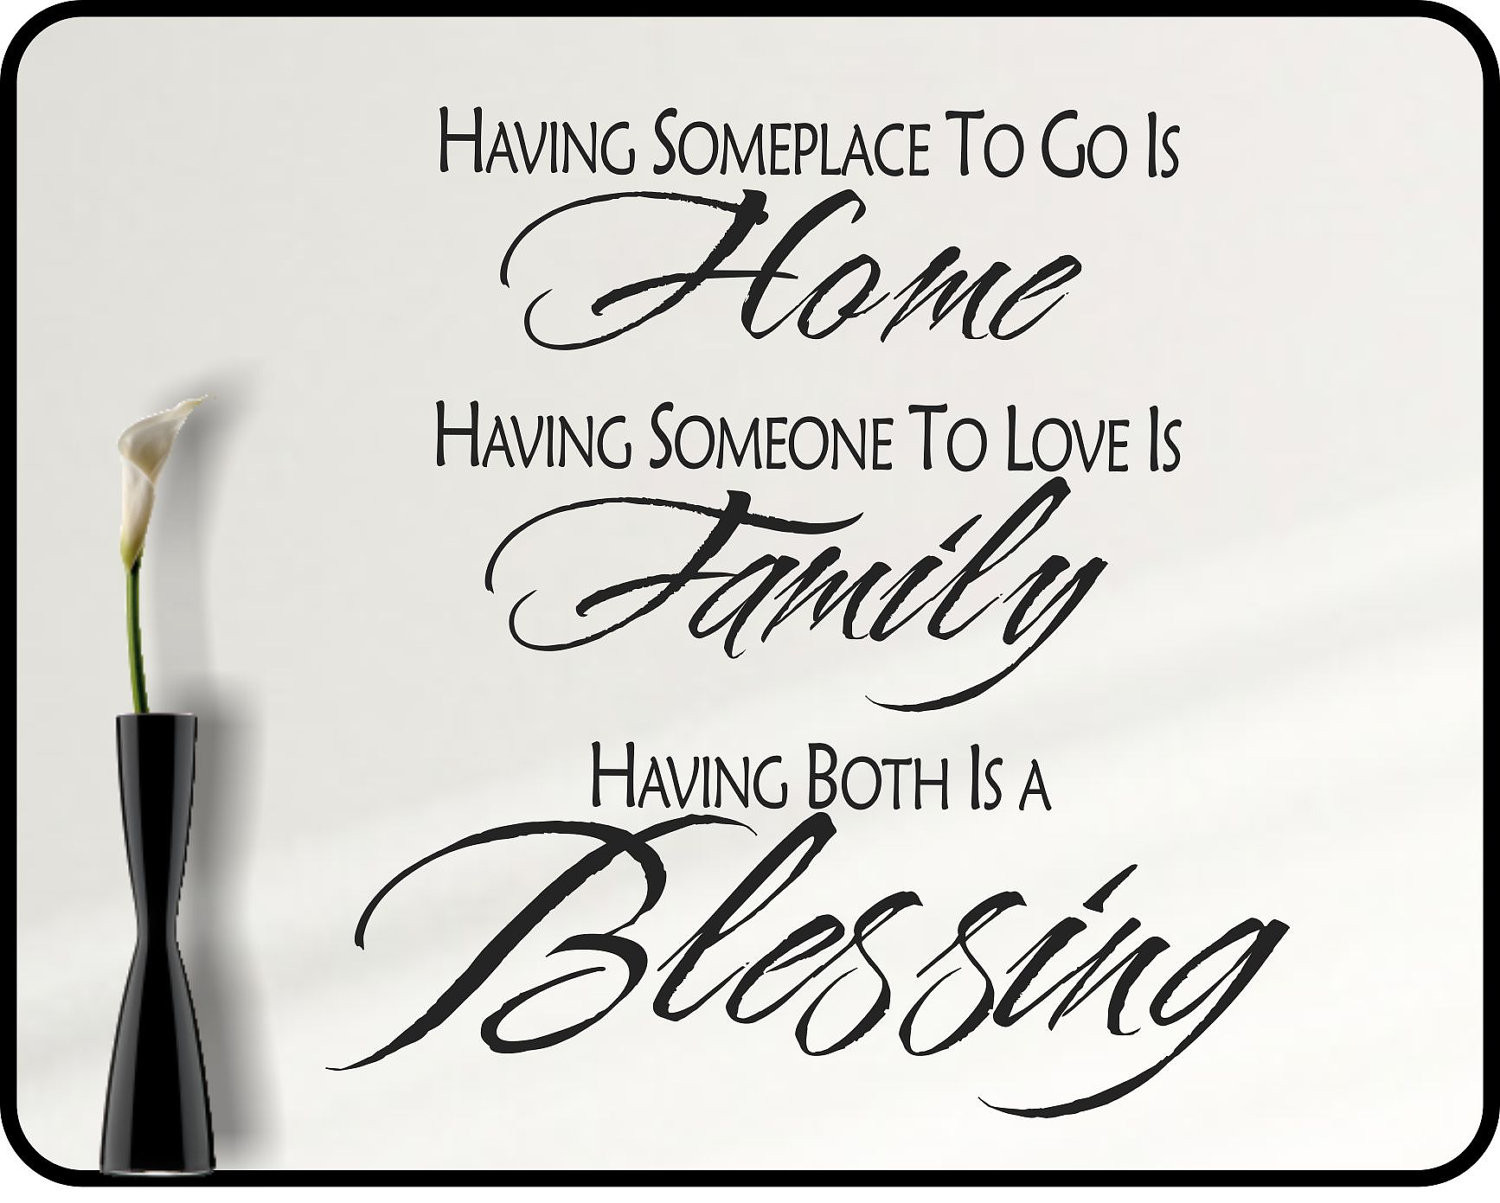 Inspirational Family Quotes
 Inspirational Family Wall decal quote family blessing home